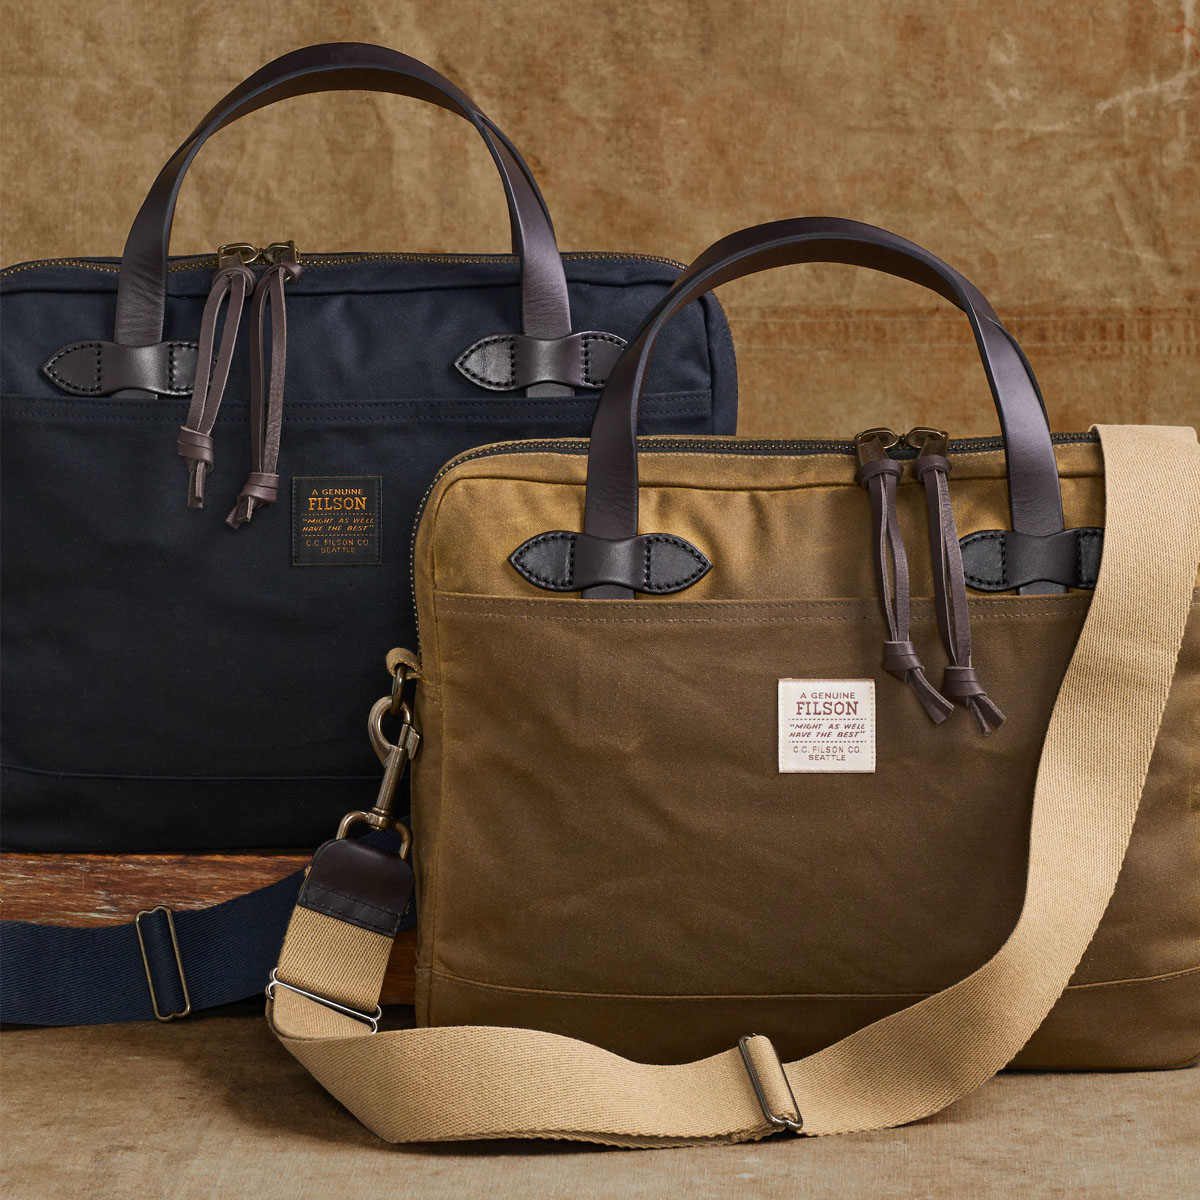 Filson Tin Cloth Compact Briefcase Dark Tan, a streamlined briefcase made with heritage materials and modern design